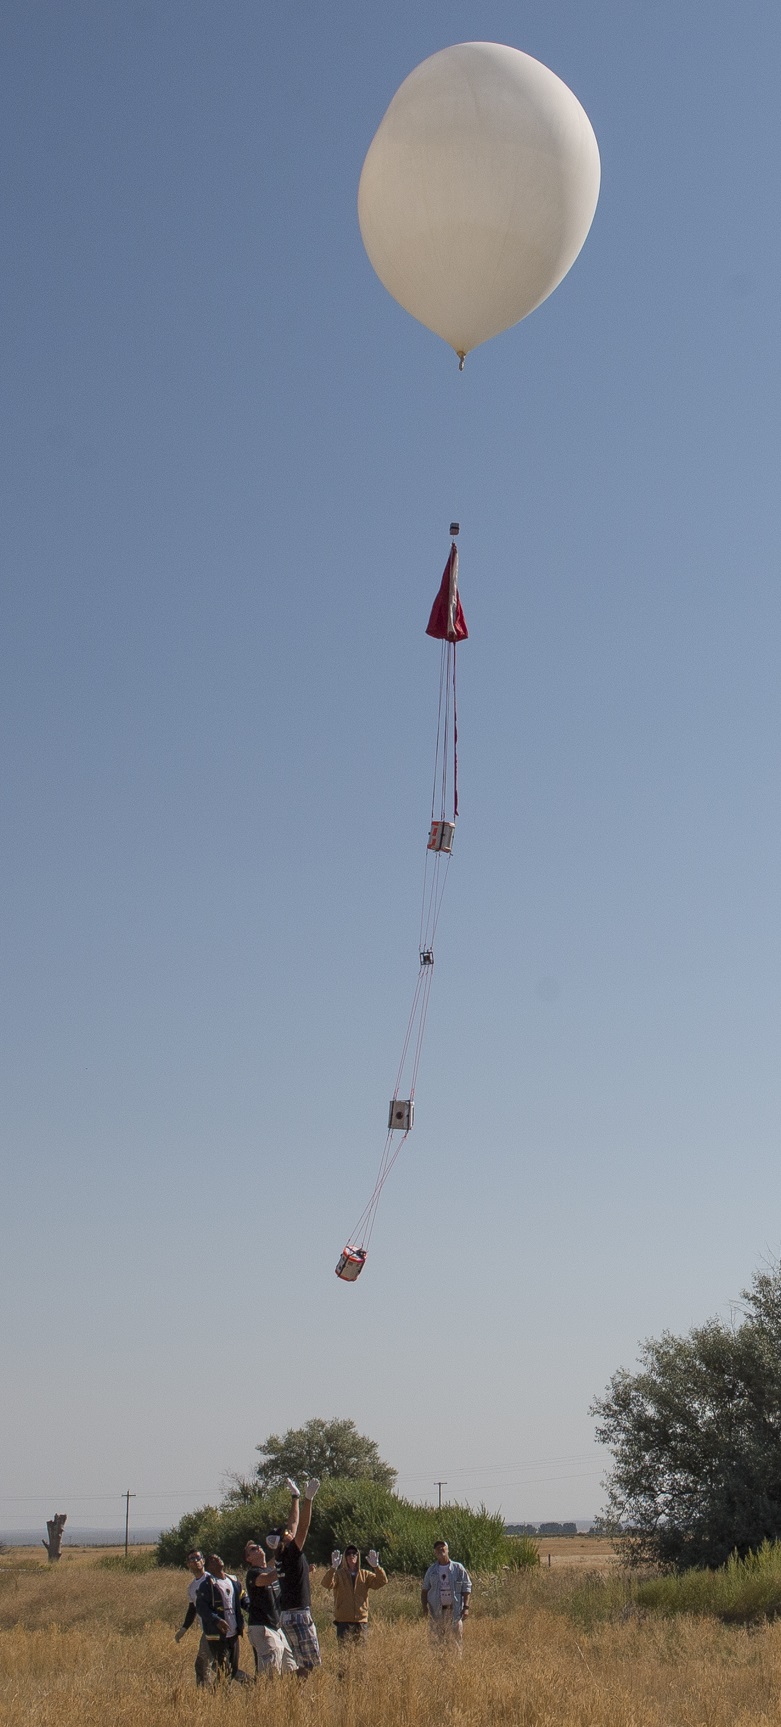 Image of engineering balloon being launched